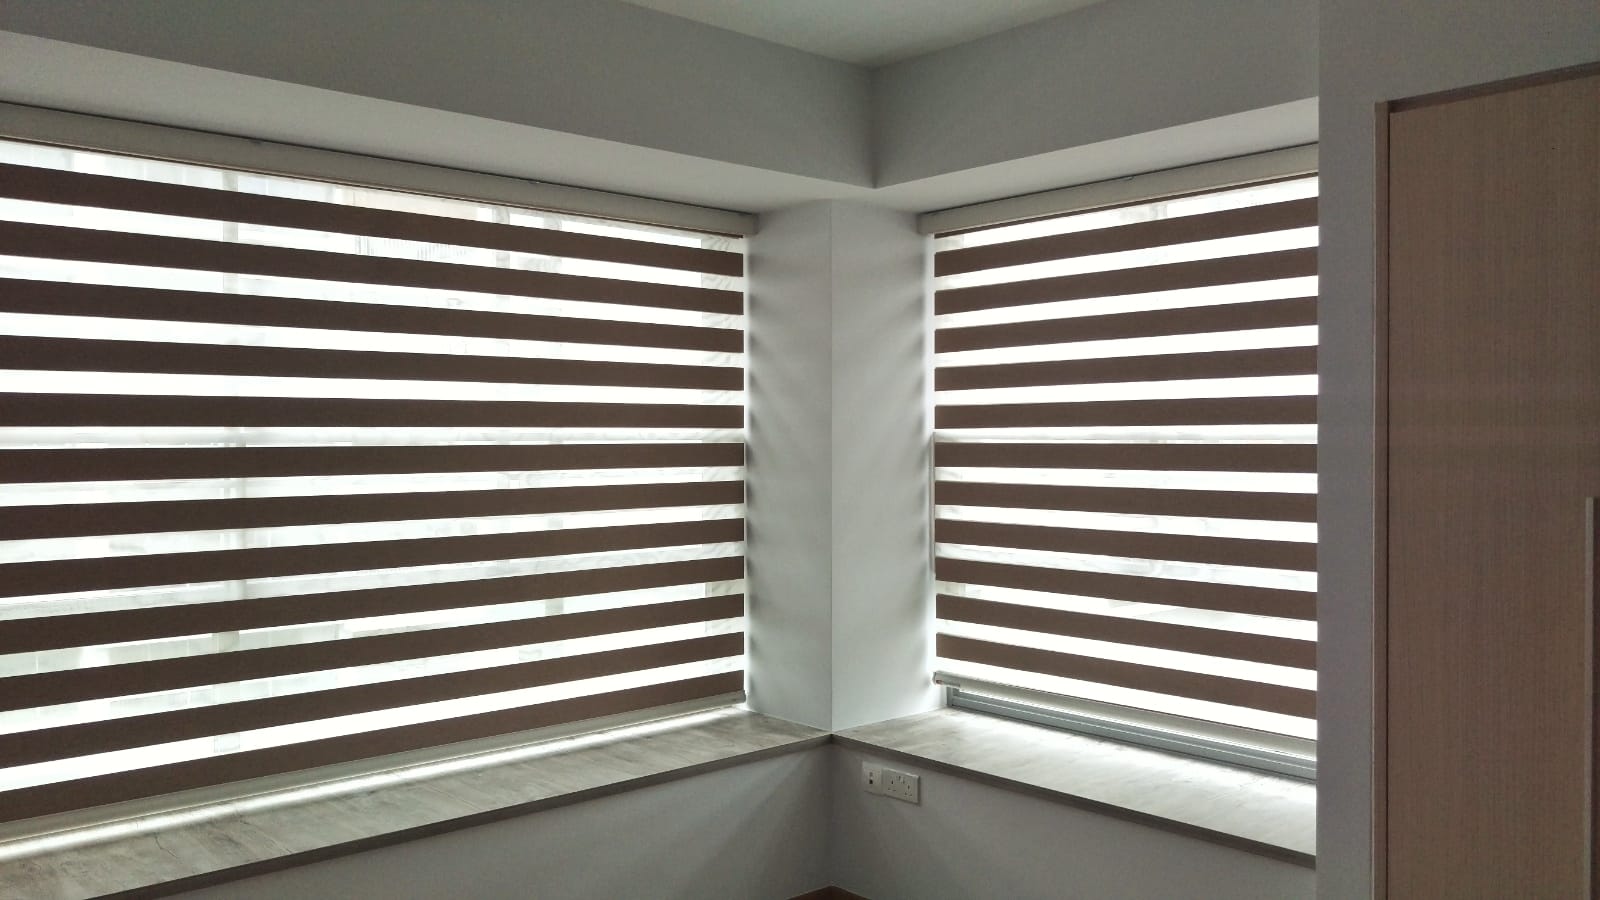 This is a Picture of Korean combi blinds-Singapore HDB flat-139B Toa Payoh lorong 1